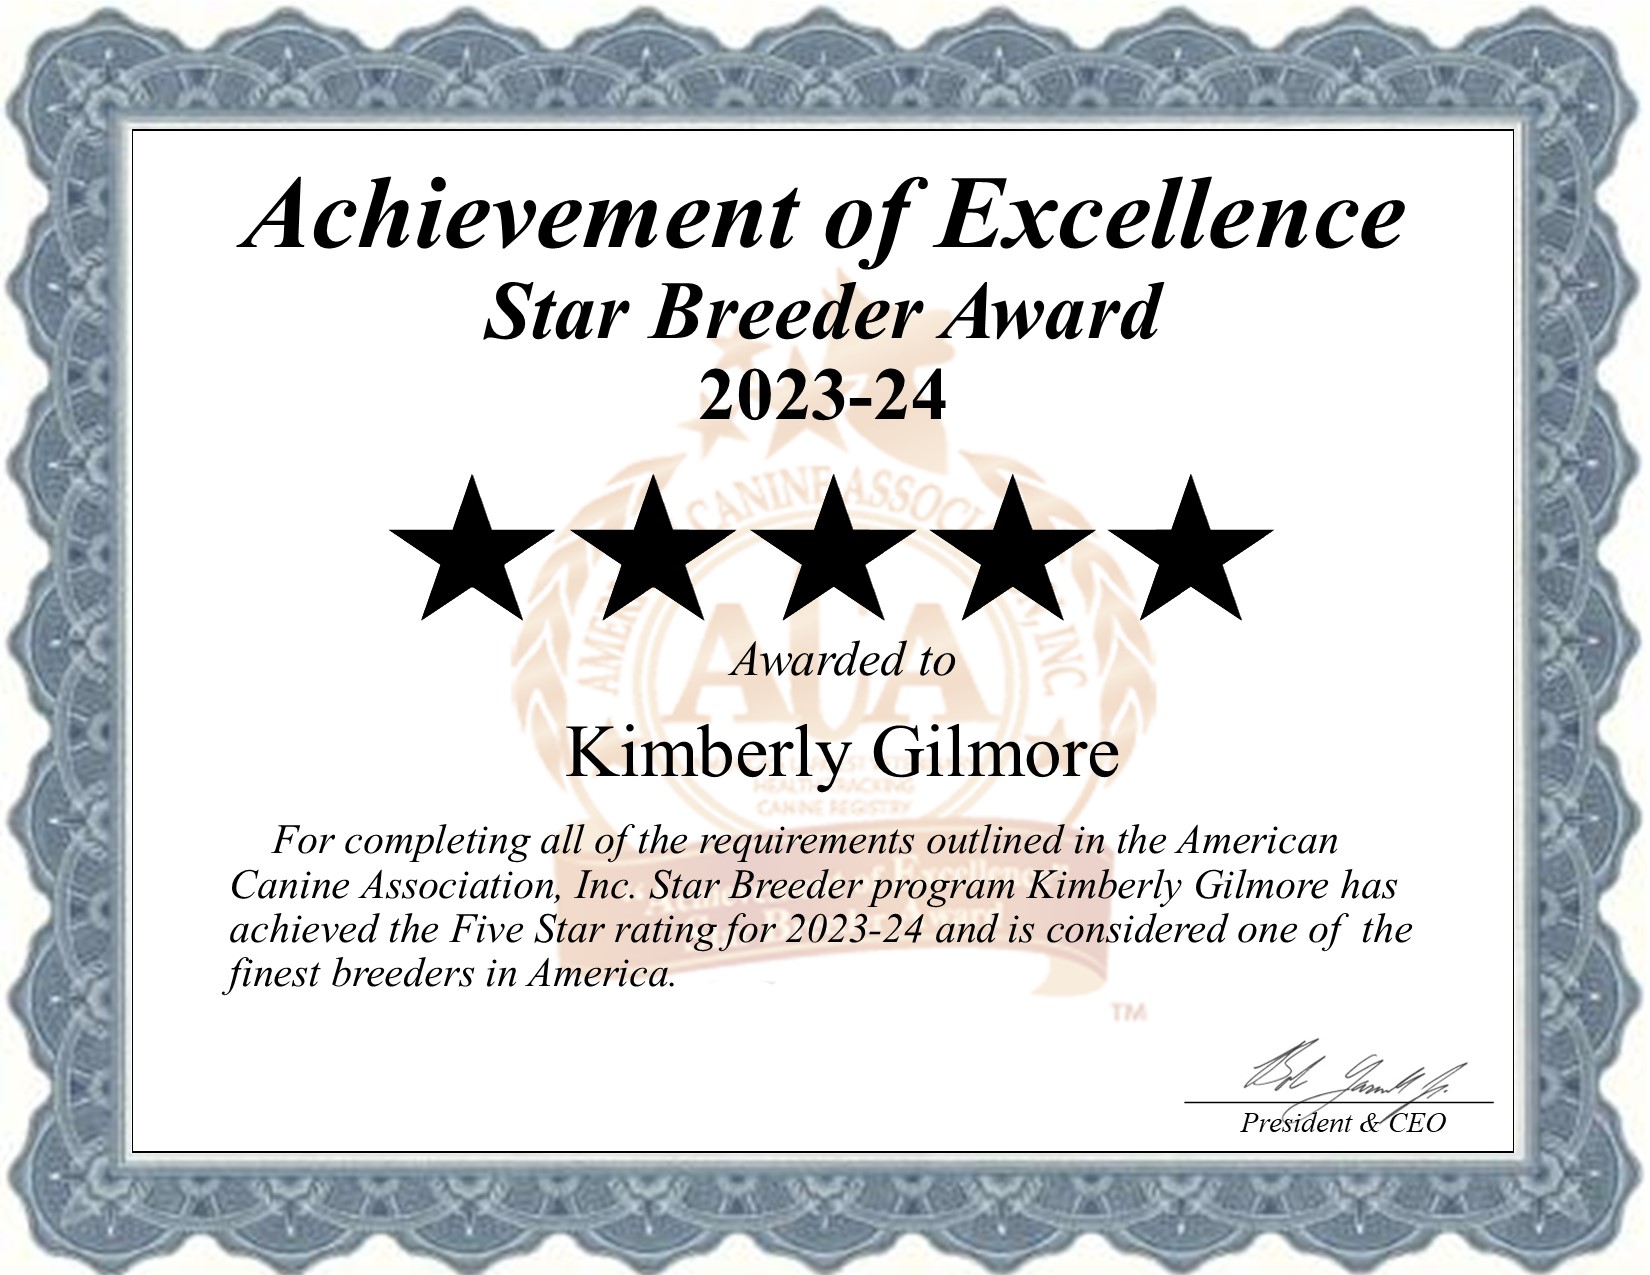 Kimberly, Gilmore, dog, breeder, star, certificate, Kimberly-Gilmore, Kingsville, MO, Missouri, puppy, dog, kennels, mill, puppymill, usda, 5-star, aca, ica, registered, Bichon Frise, none